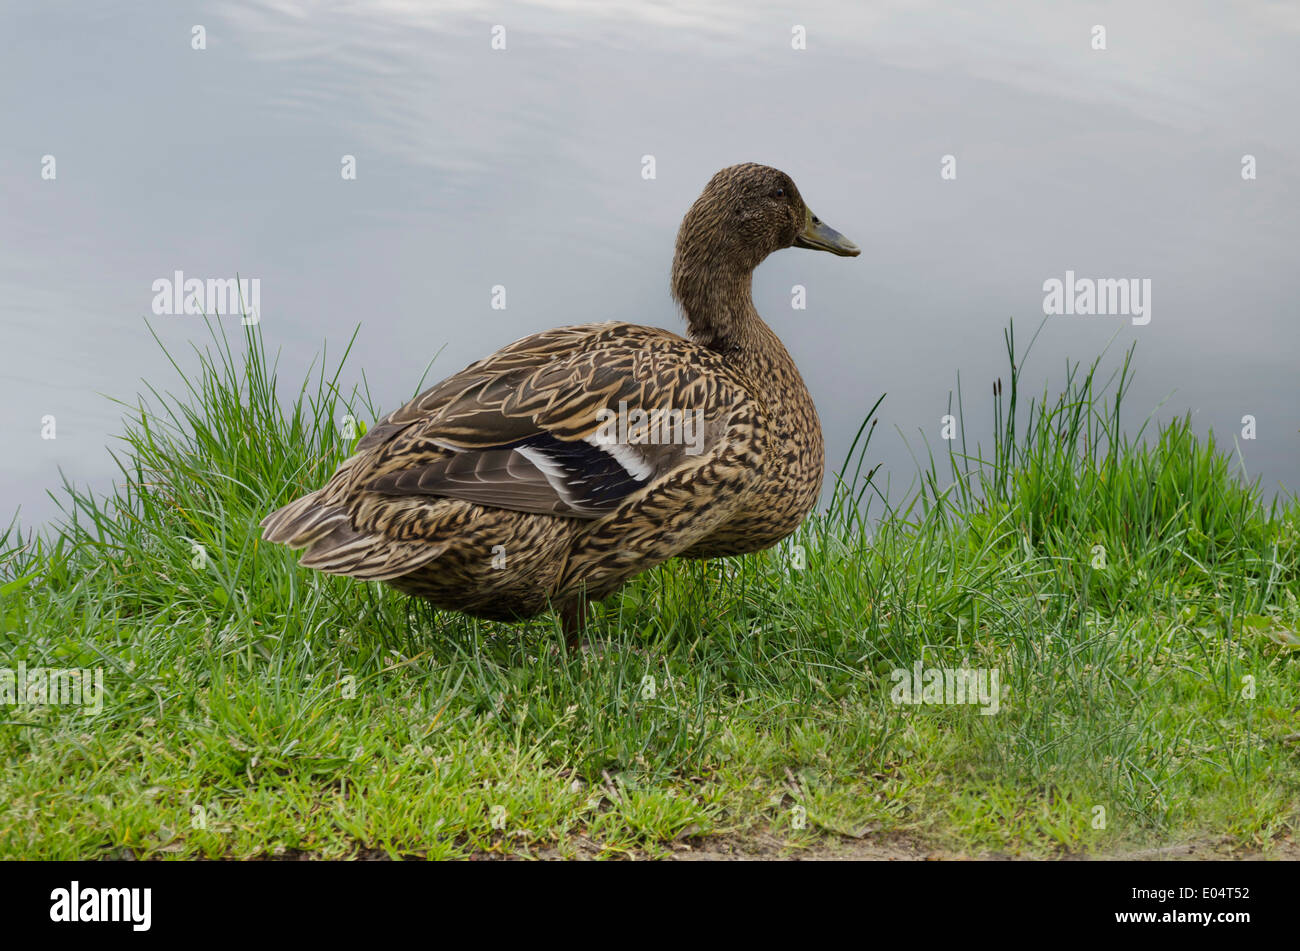 A hen mallard duck with brown feathers in rest (Anas platyrhynchos) Stock Photo